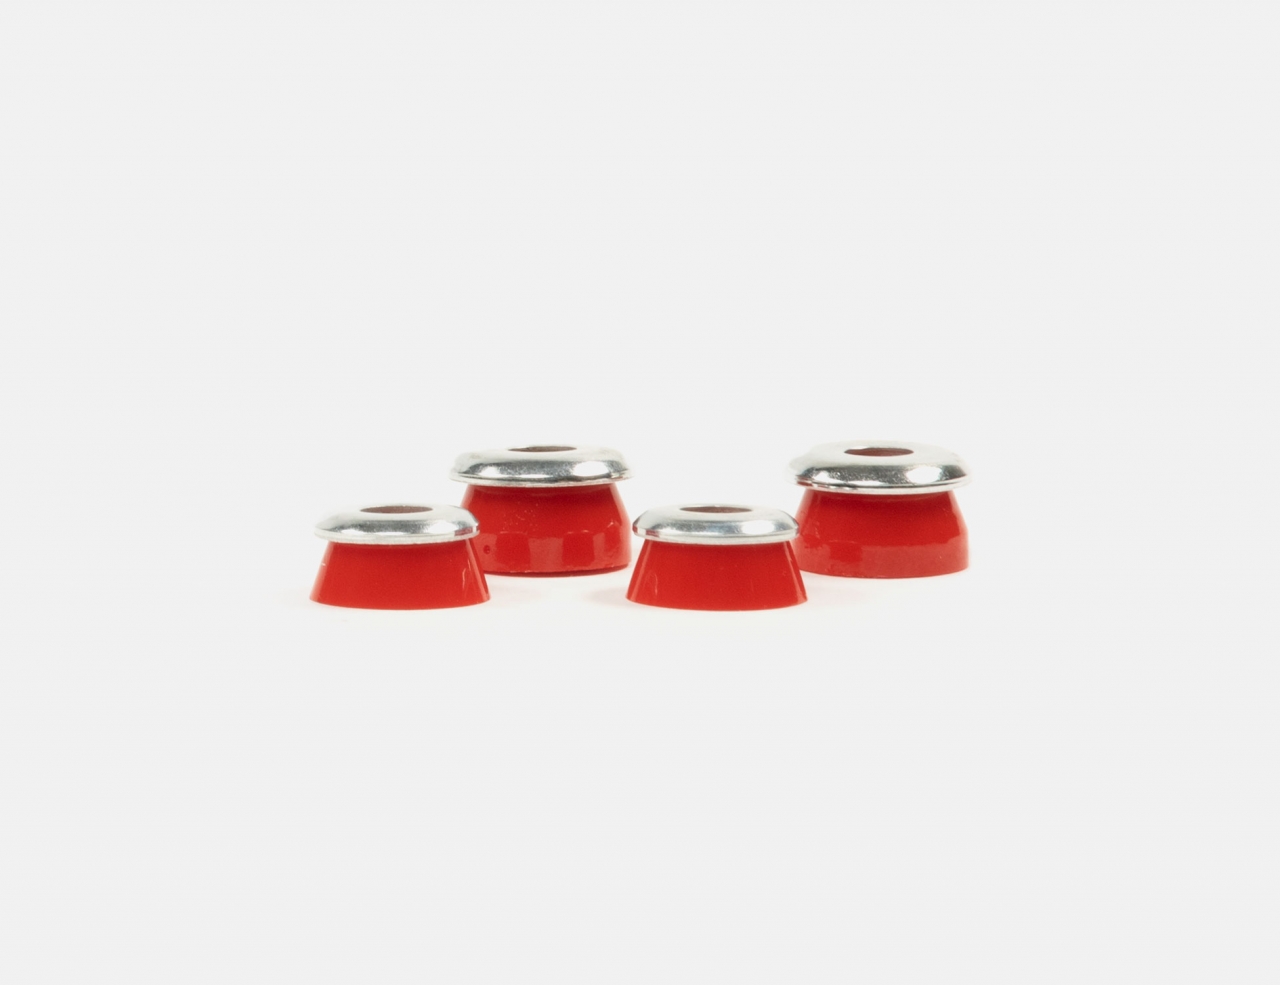 Independent Standard Concial Cushions Soft 88A Bushings